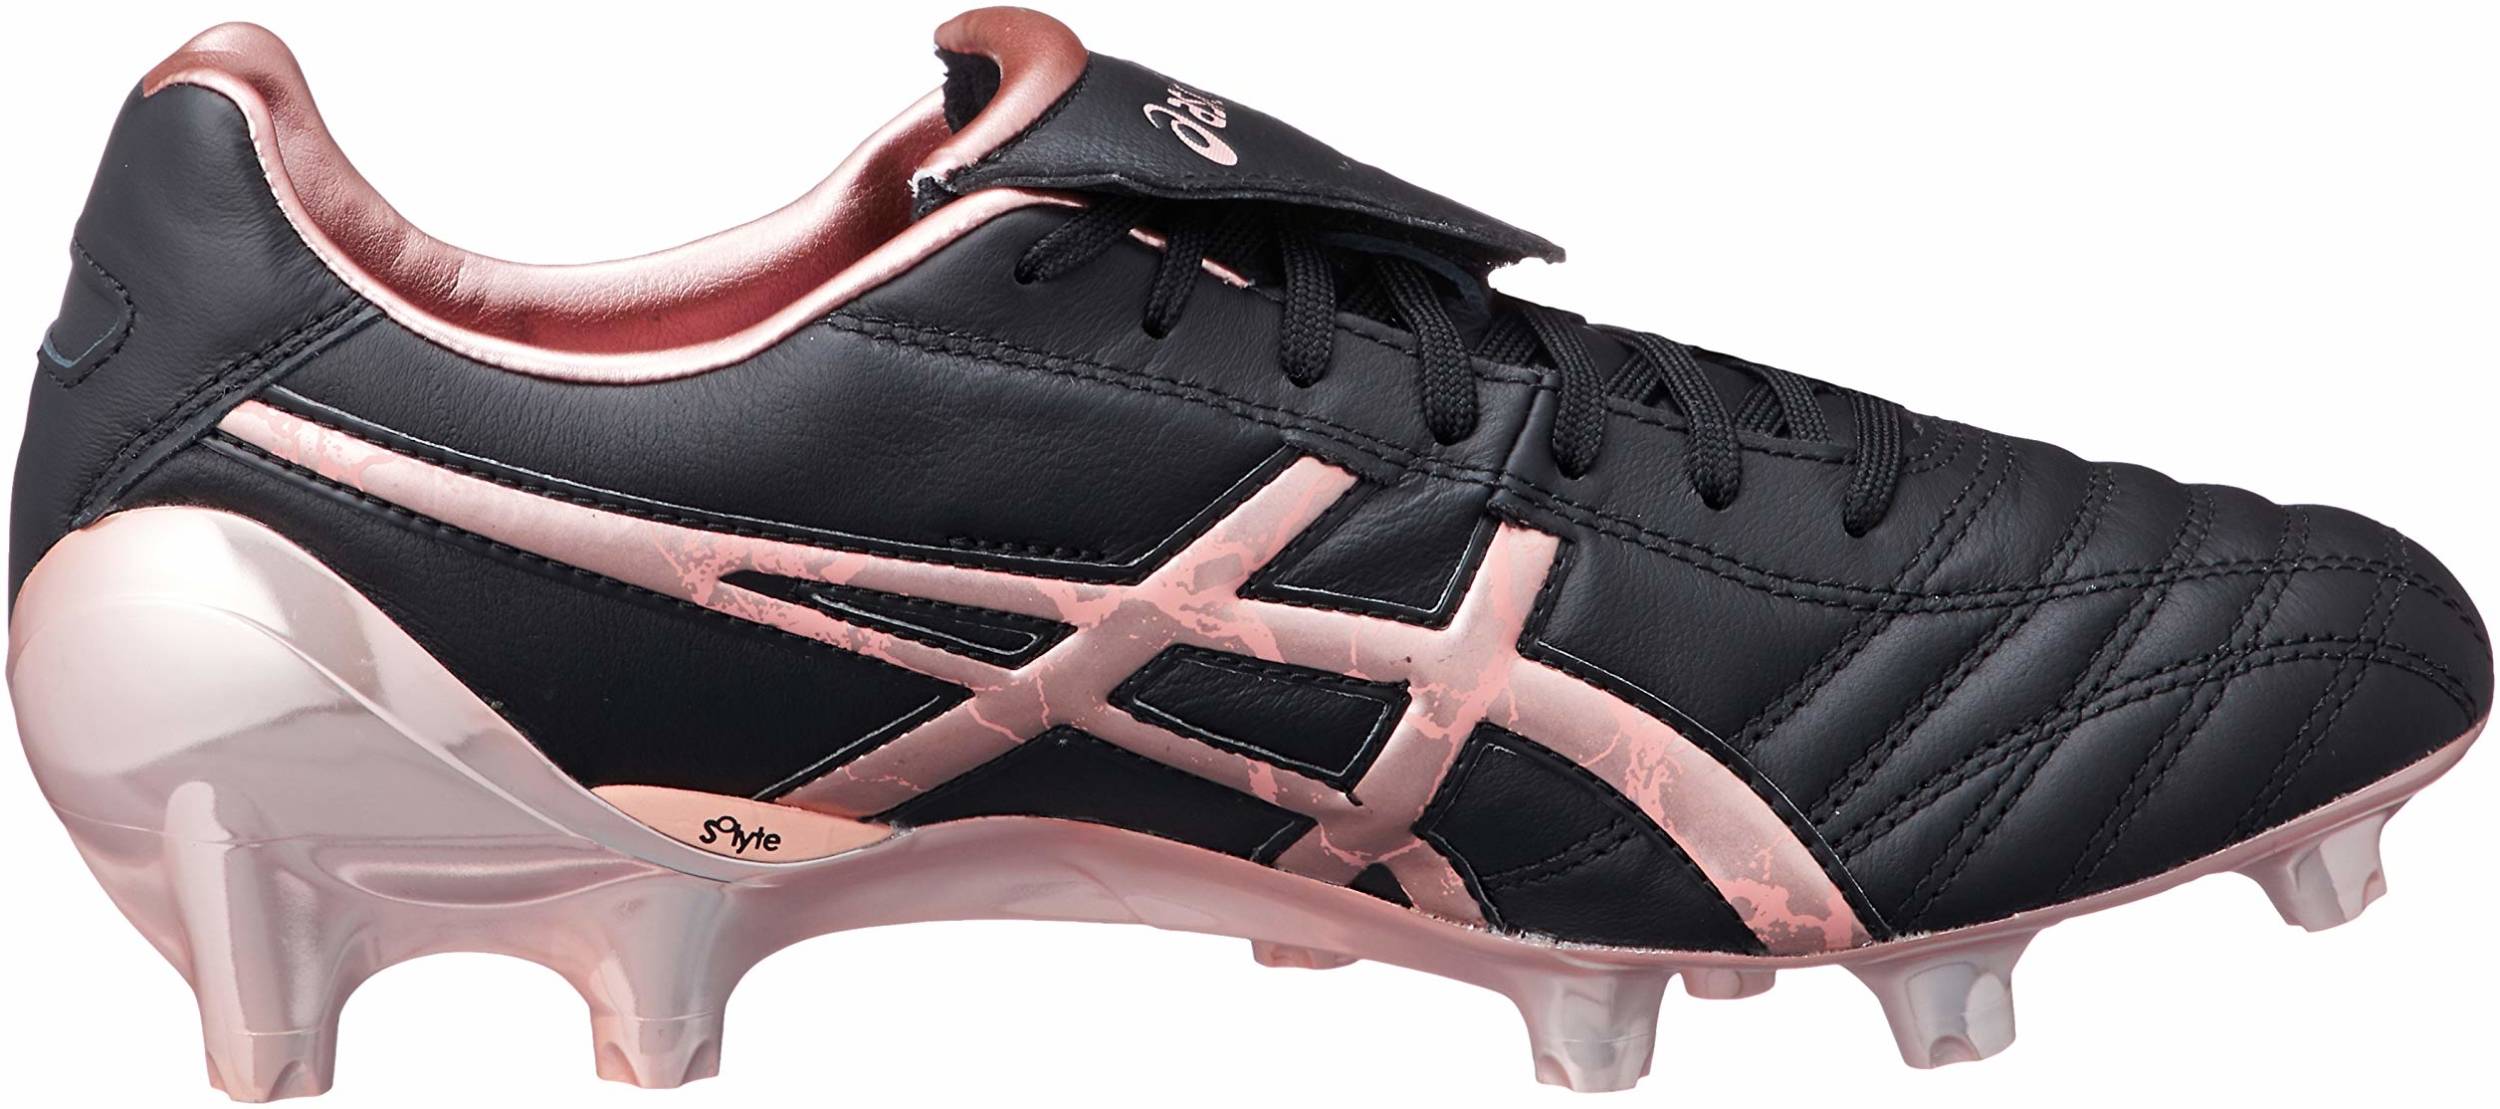 asics football boots review